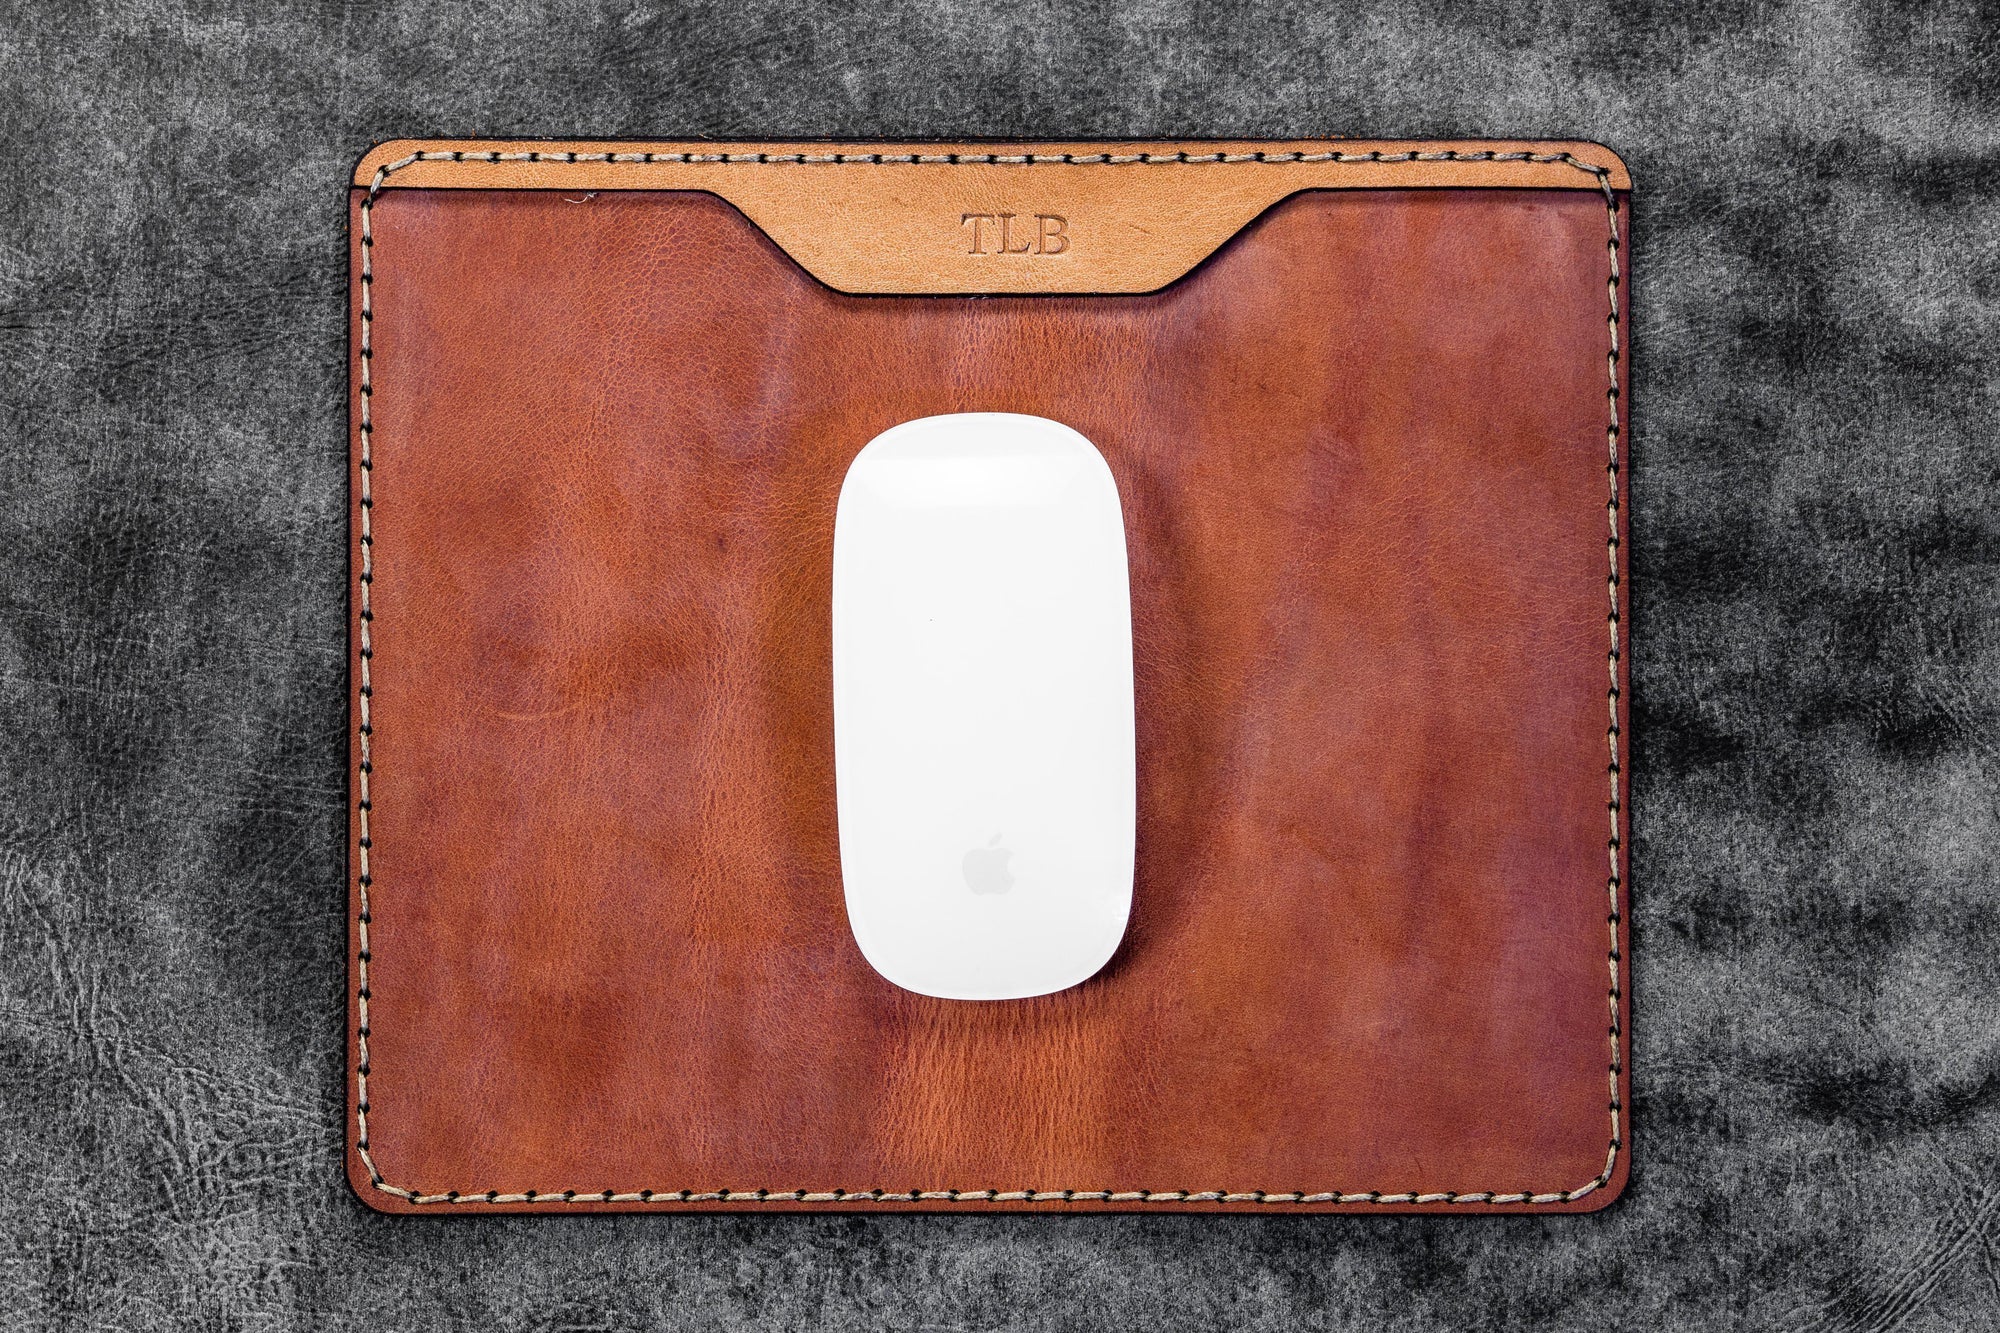 https://cdn.shopify.com/s/files/1/0575/7177/products/leather-mouse-pad_2000x.jpg?v=1617635180